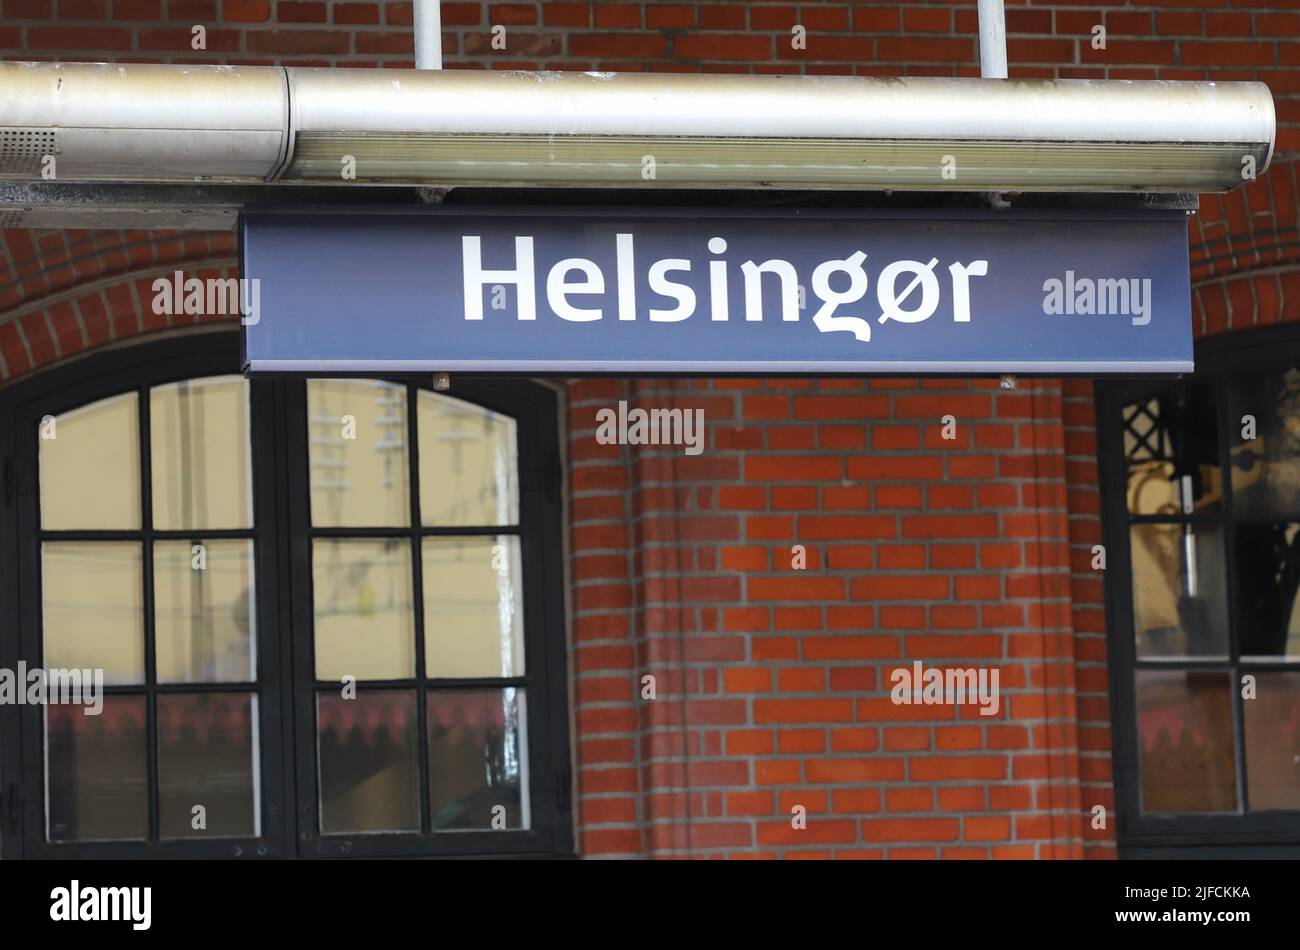 Close-up view of the Danish railroad station Helsingor name sign. Stock Photo